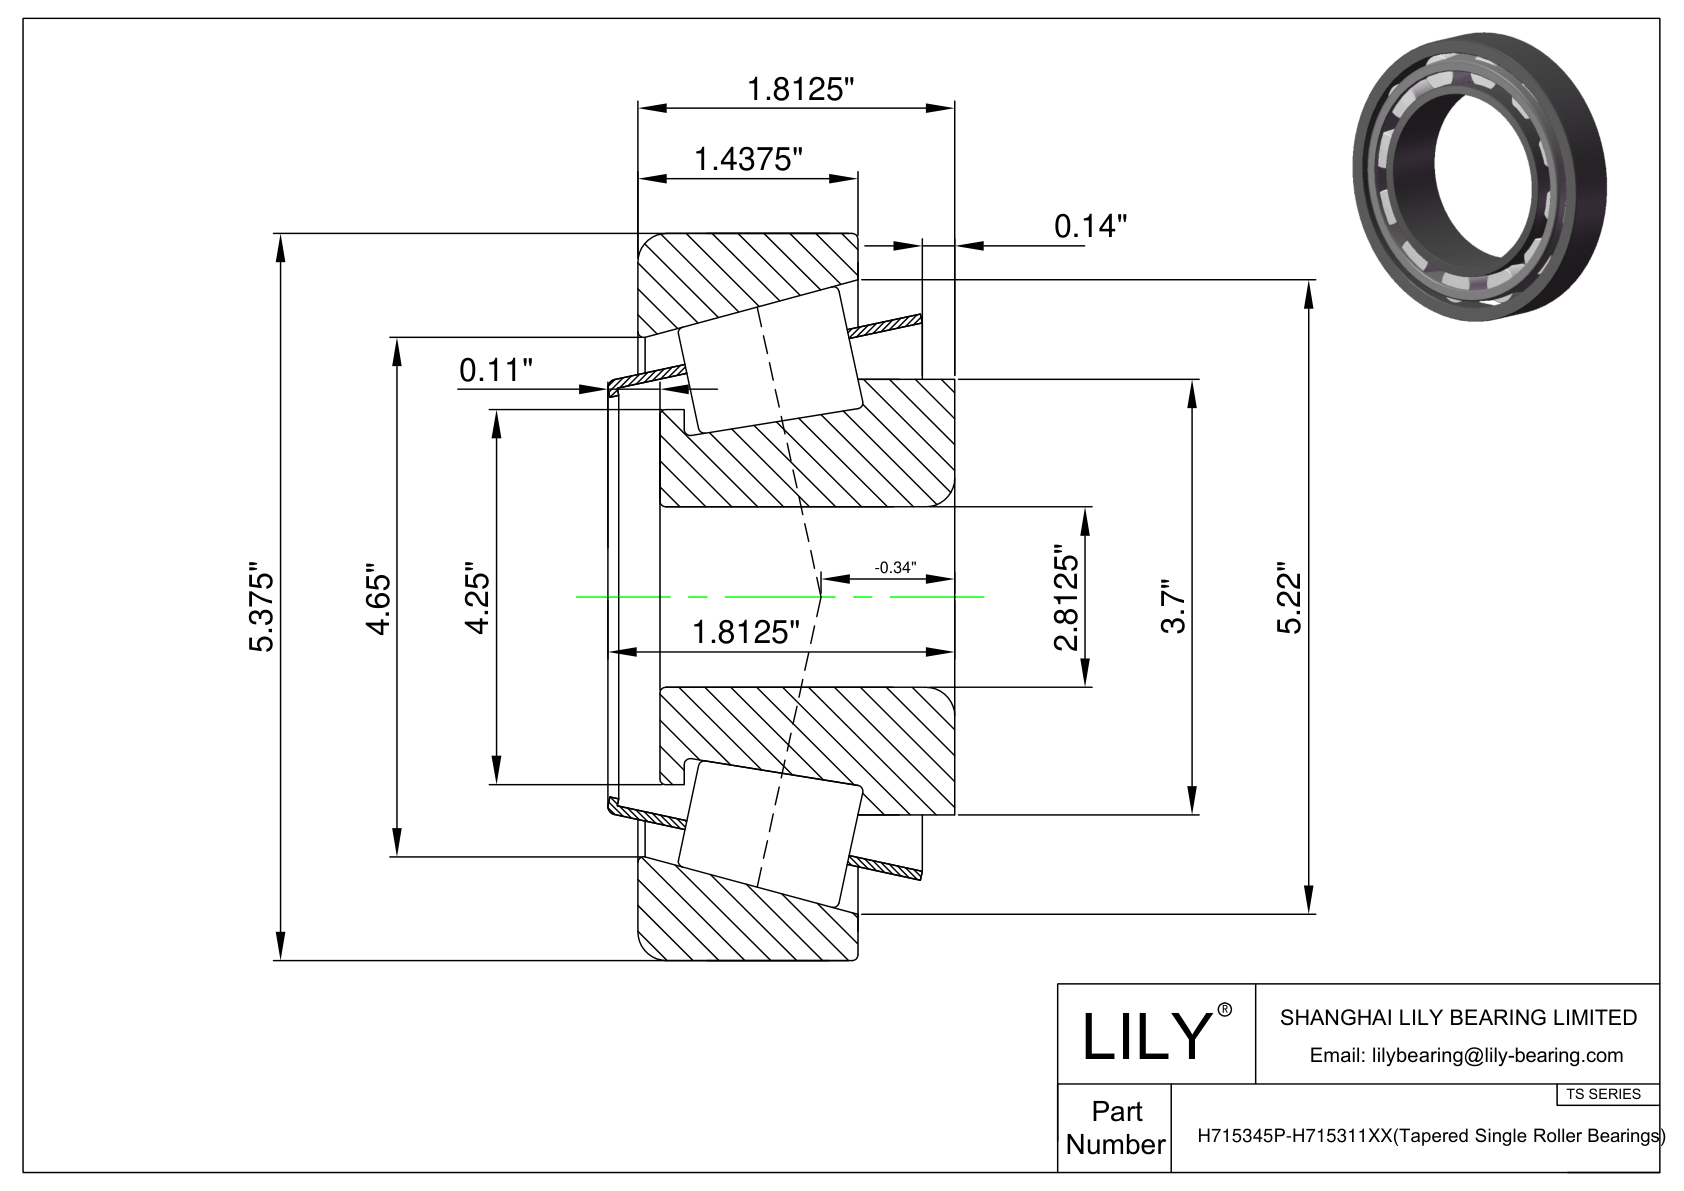 H715345P-H715311XX TS (Tapered Single Roller Bearings) (Imperial) cad drawing